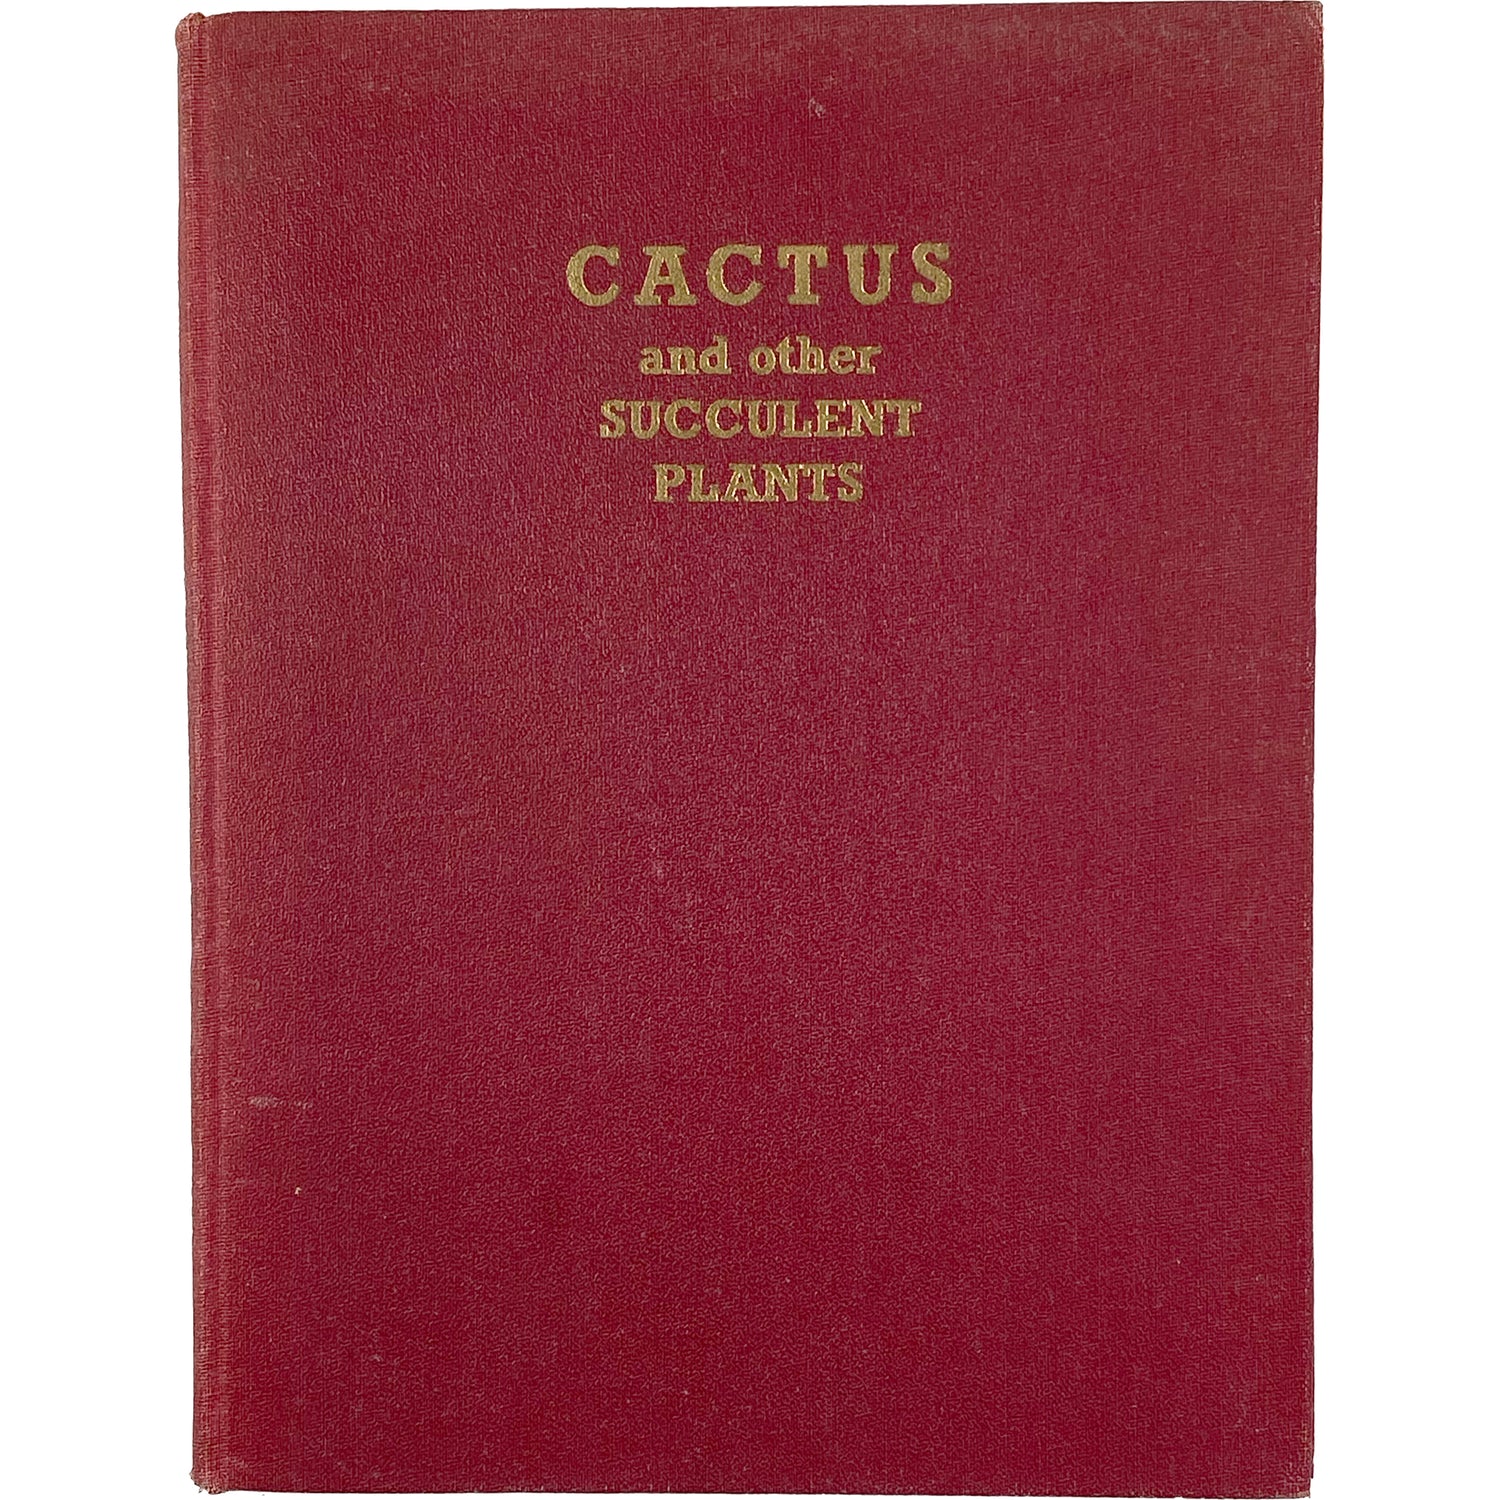 CACTUS AND OTHER SUCCULENT PLANTS